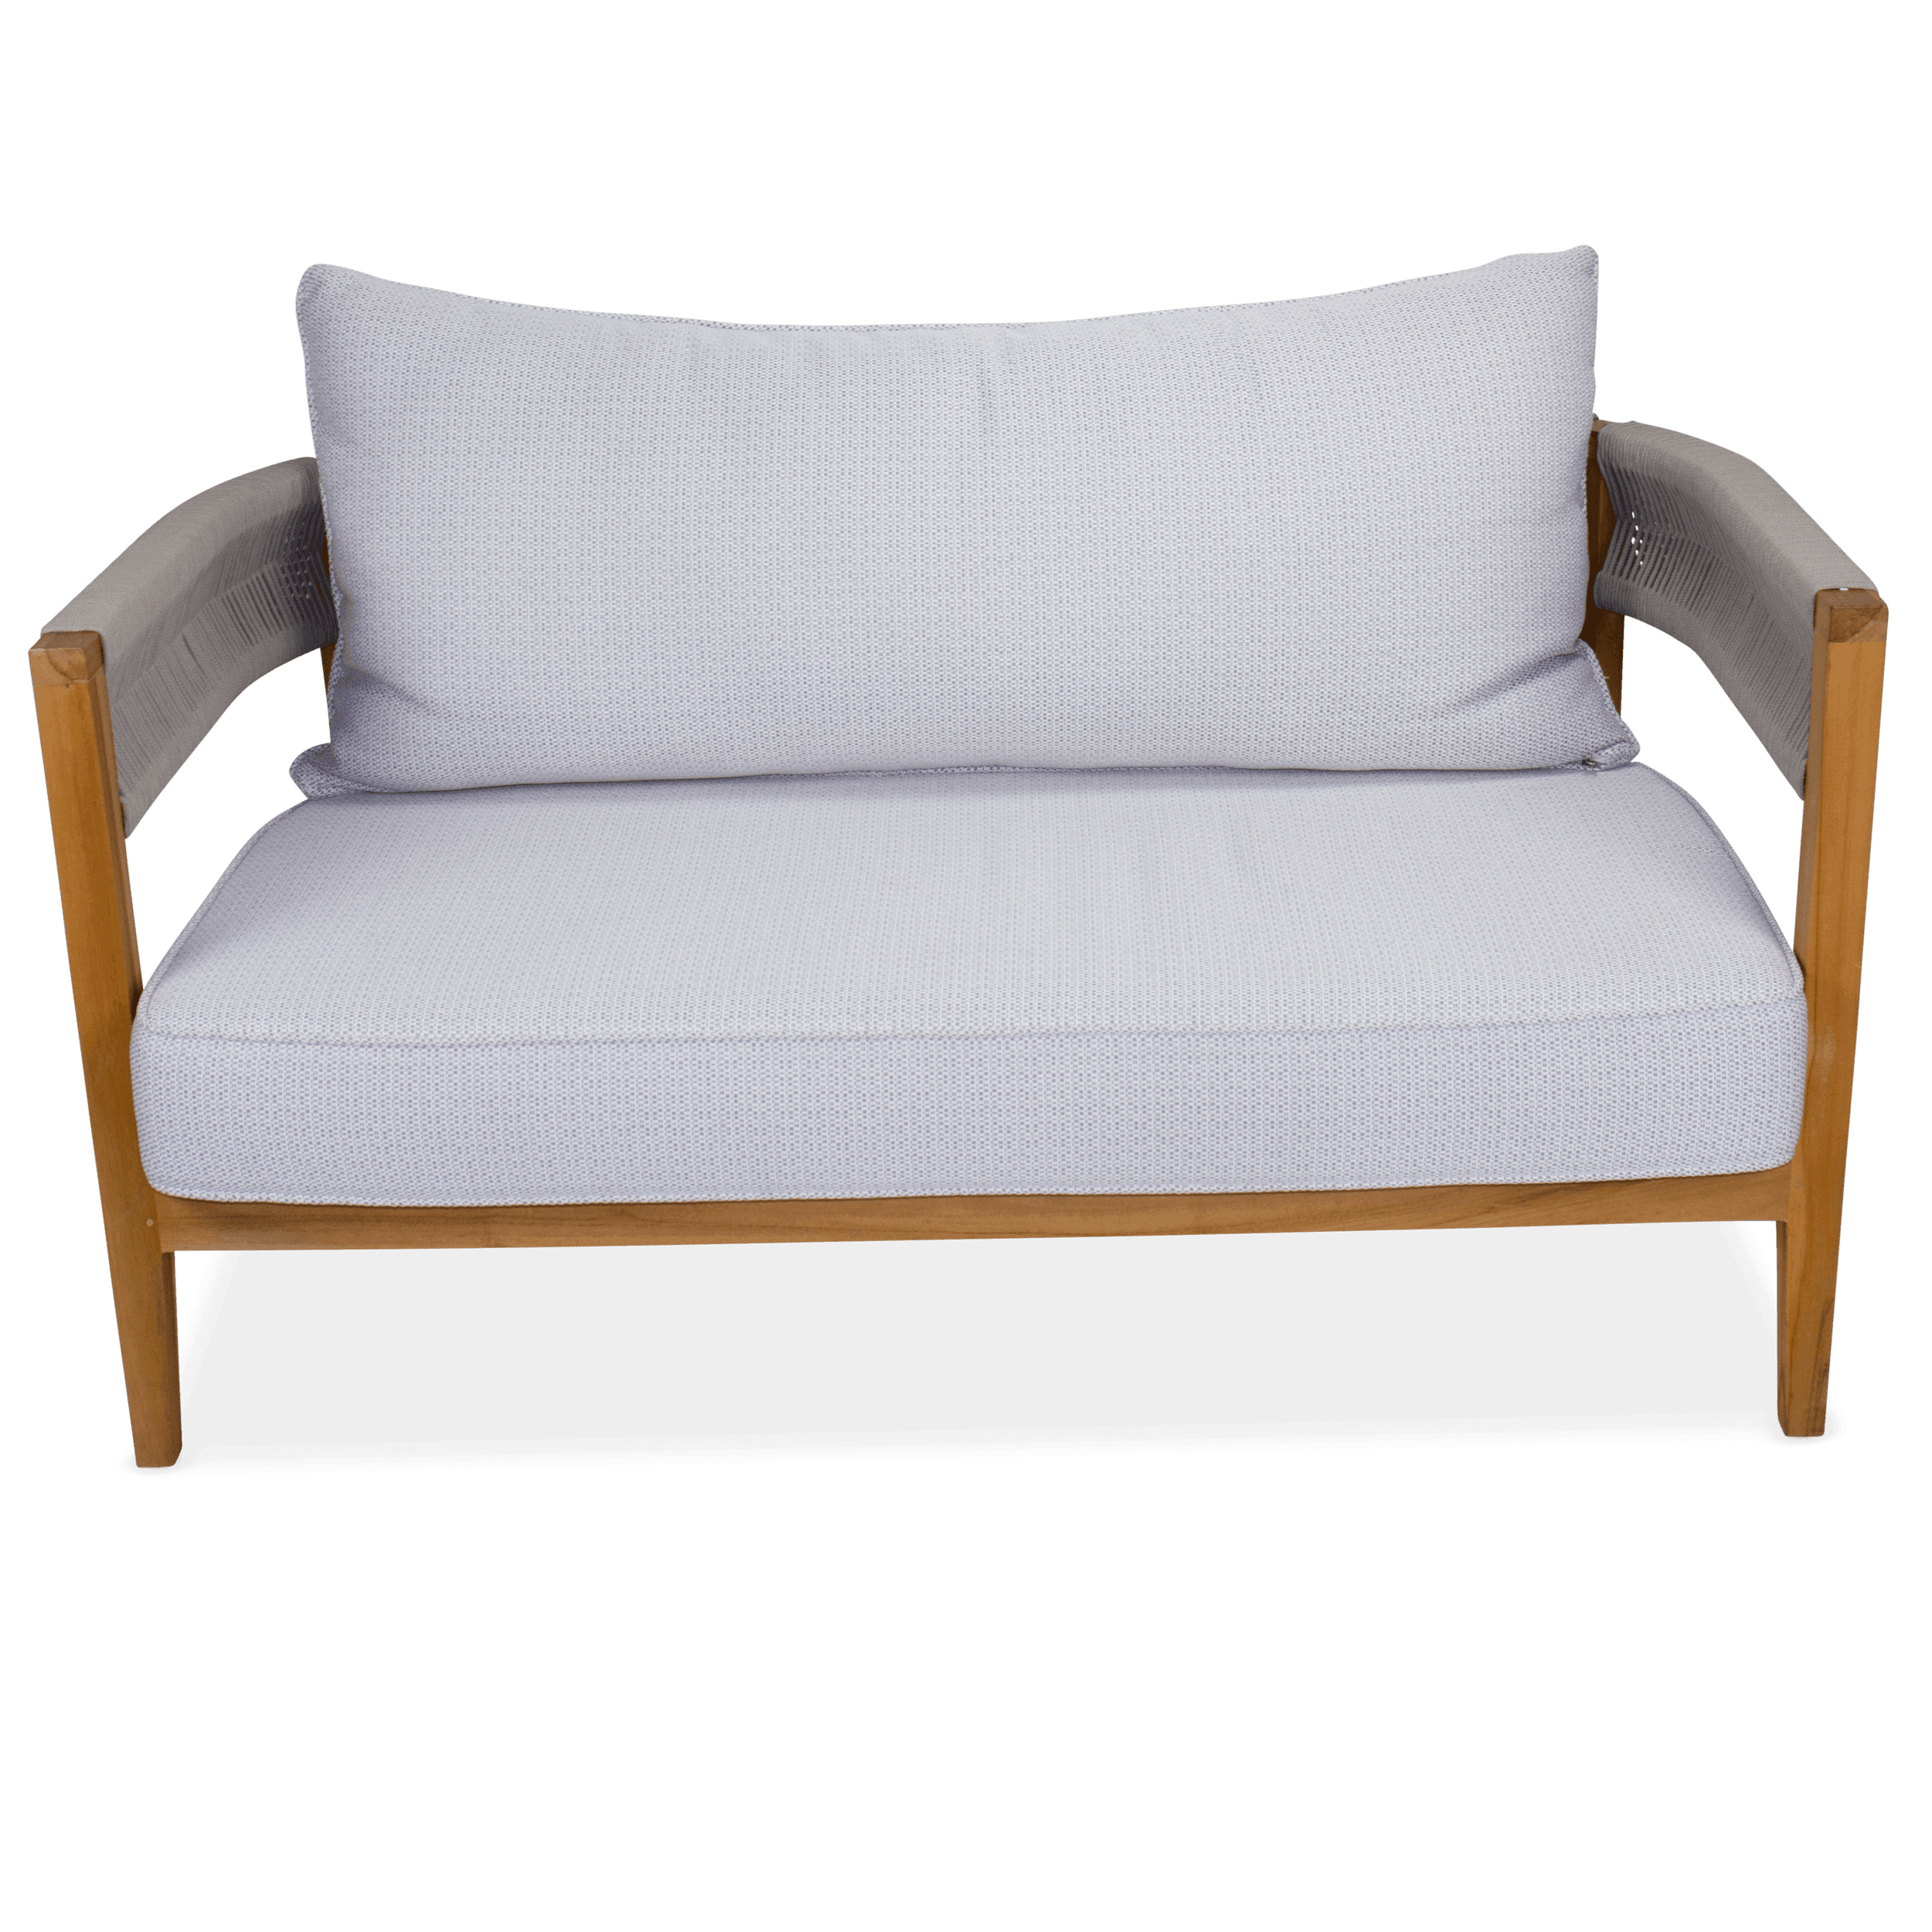 Pacific 2 Seater in Premium Natural Teak and Stone Check Sunproof All Weather Fabric - The Furniture Shack